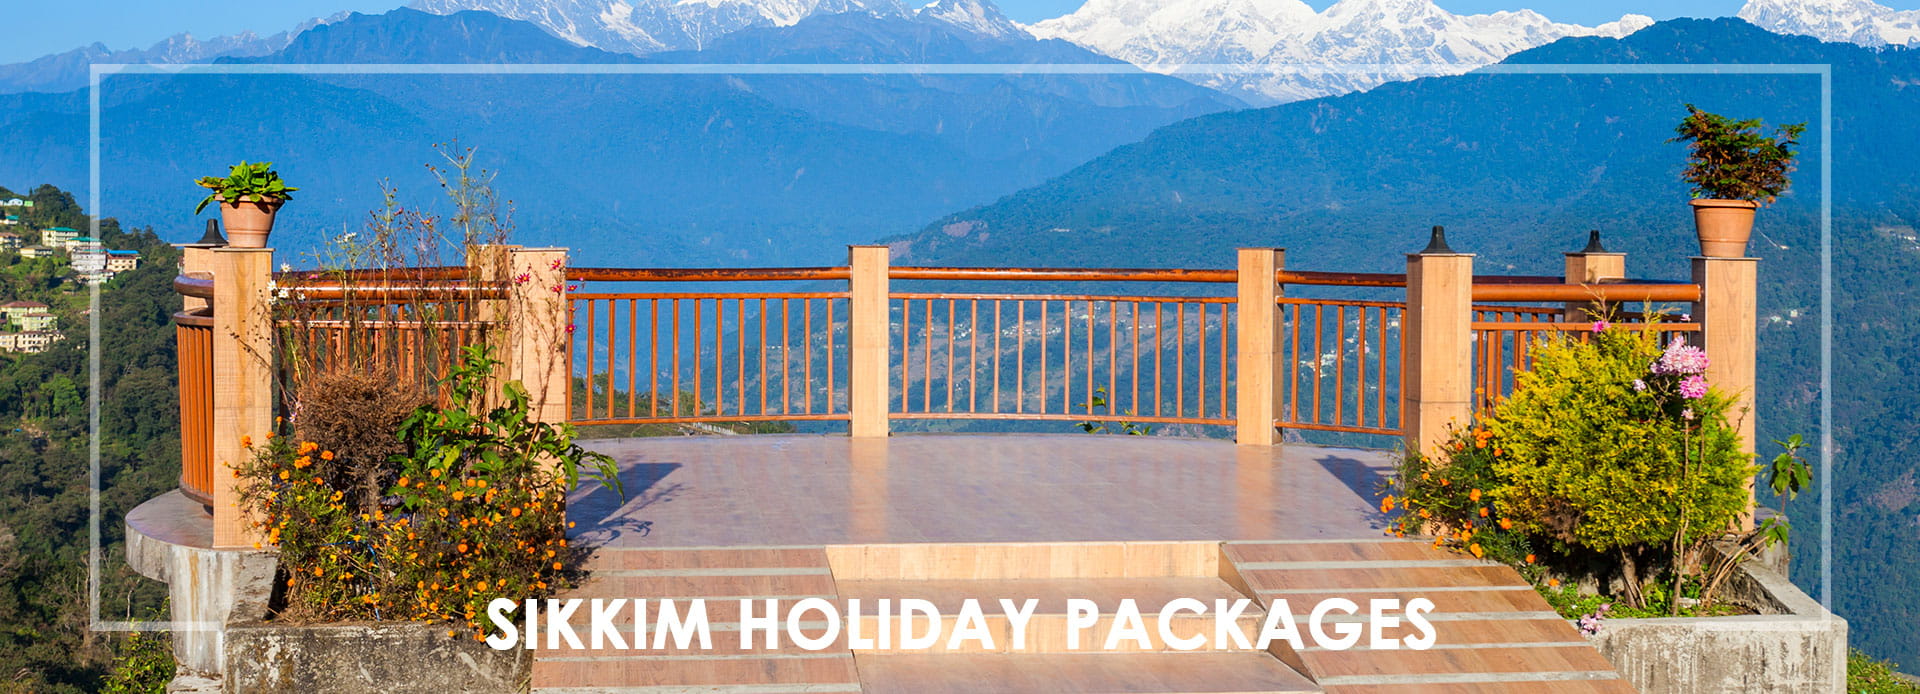  Sikkim Holiday Packages